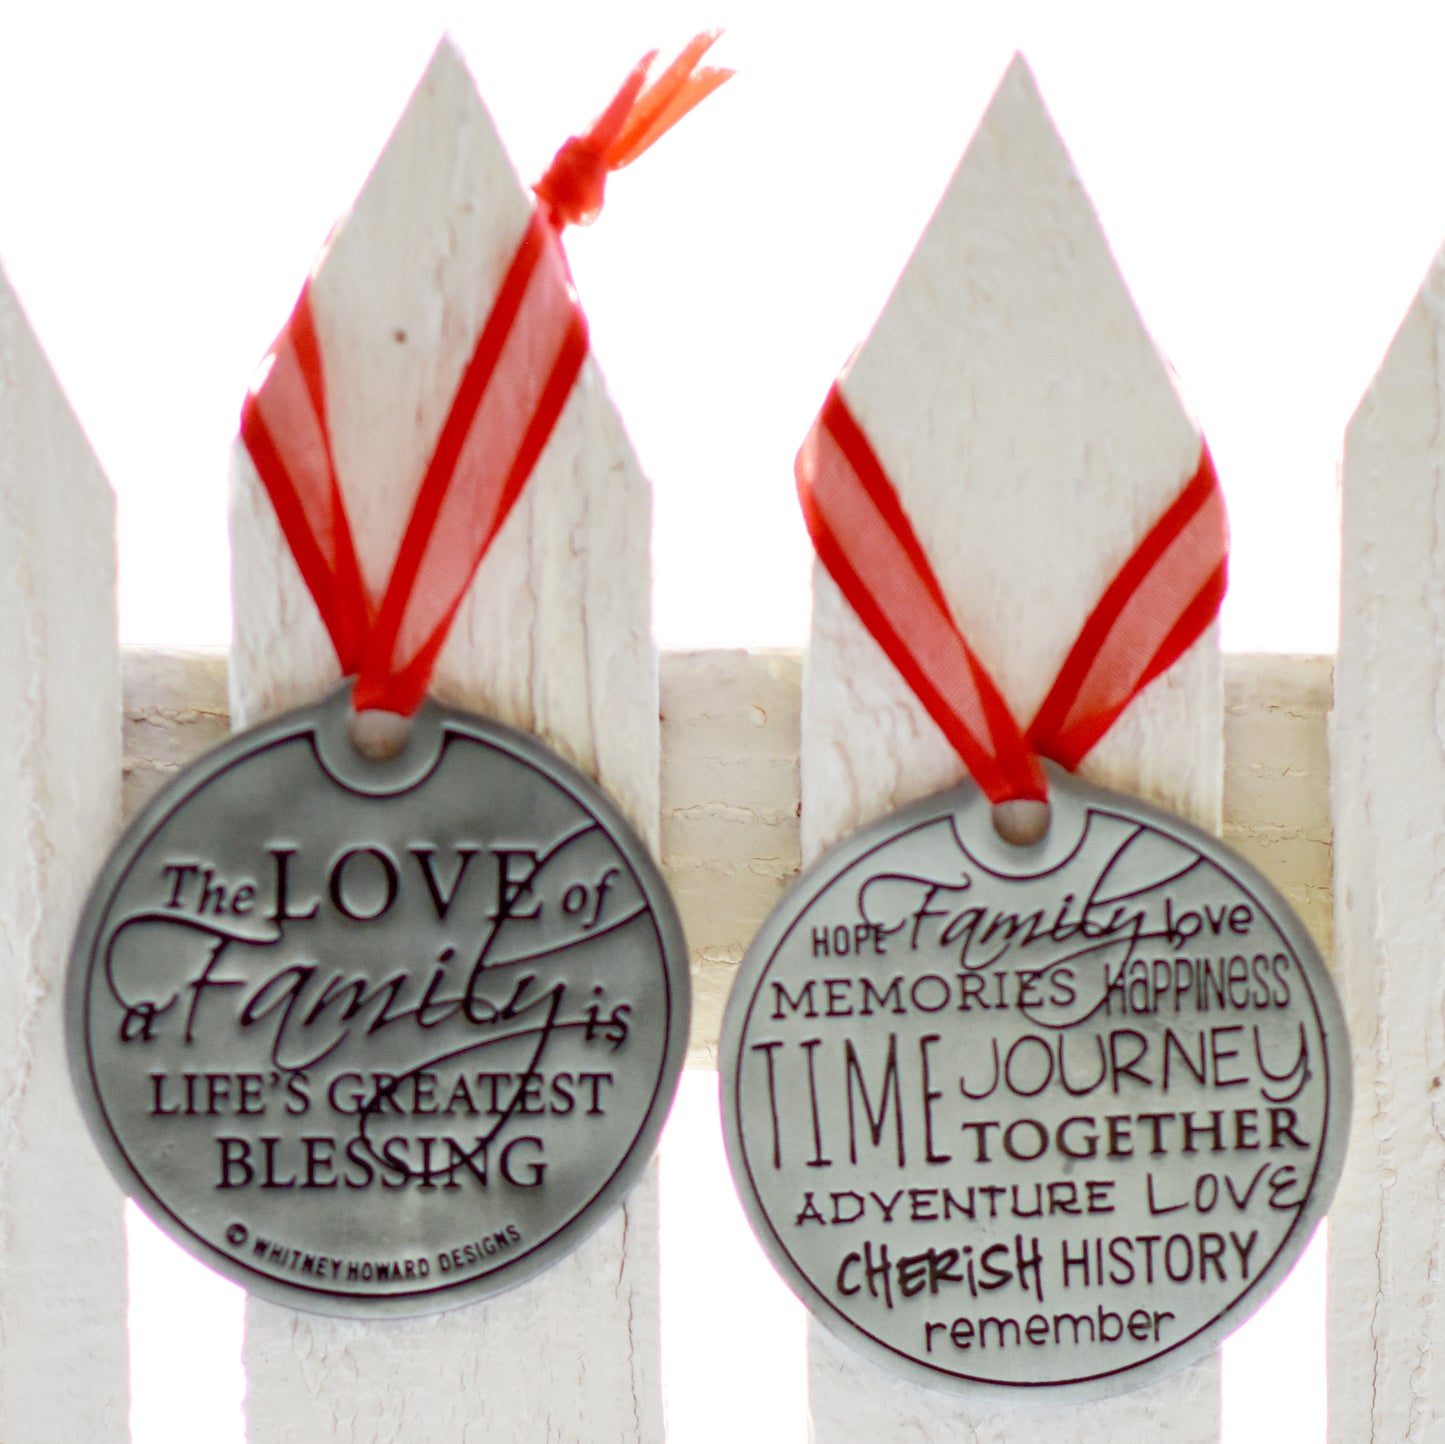 The Love of a Family is Life's Greatest Blessing Holiday Ornament front and back hanging on a fence